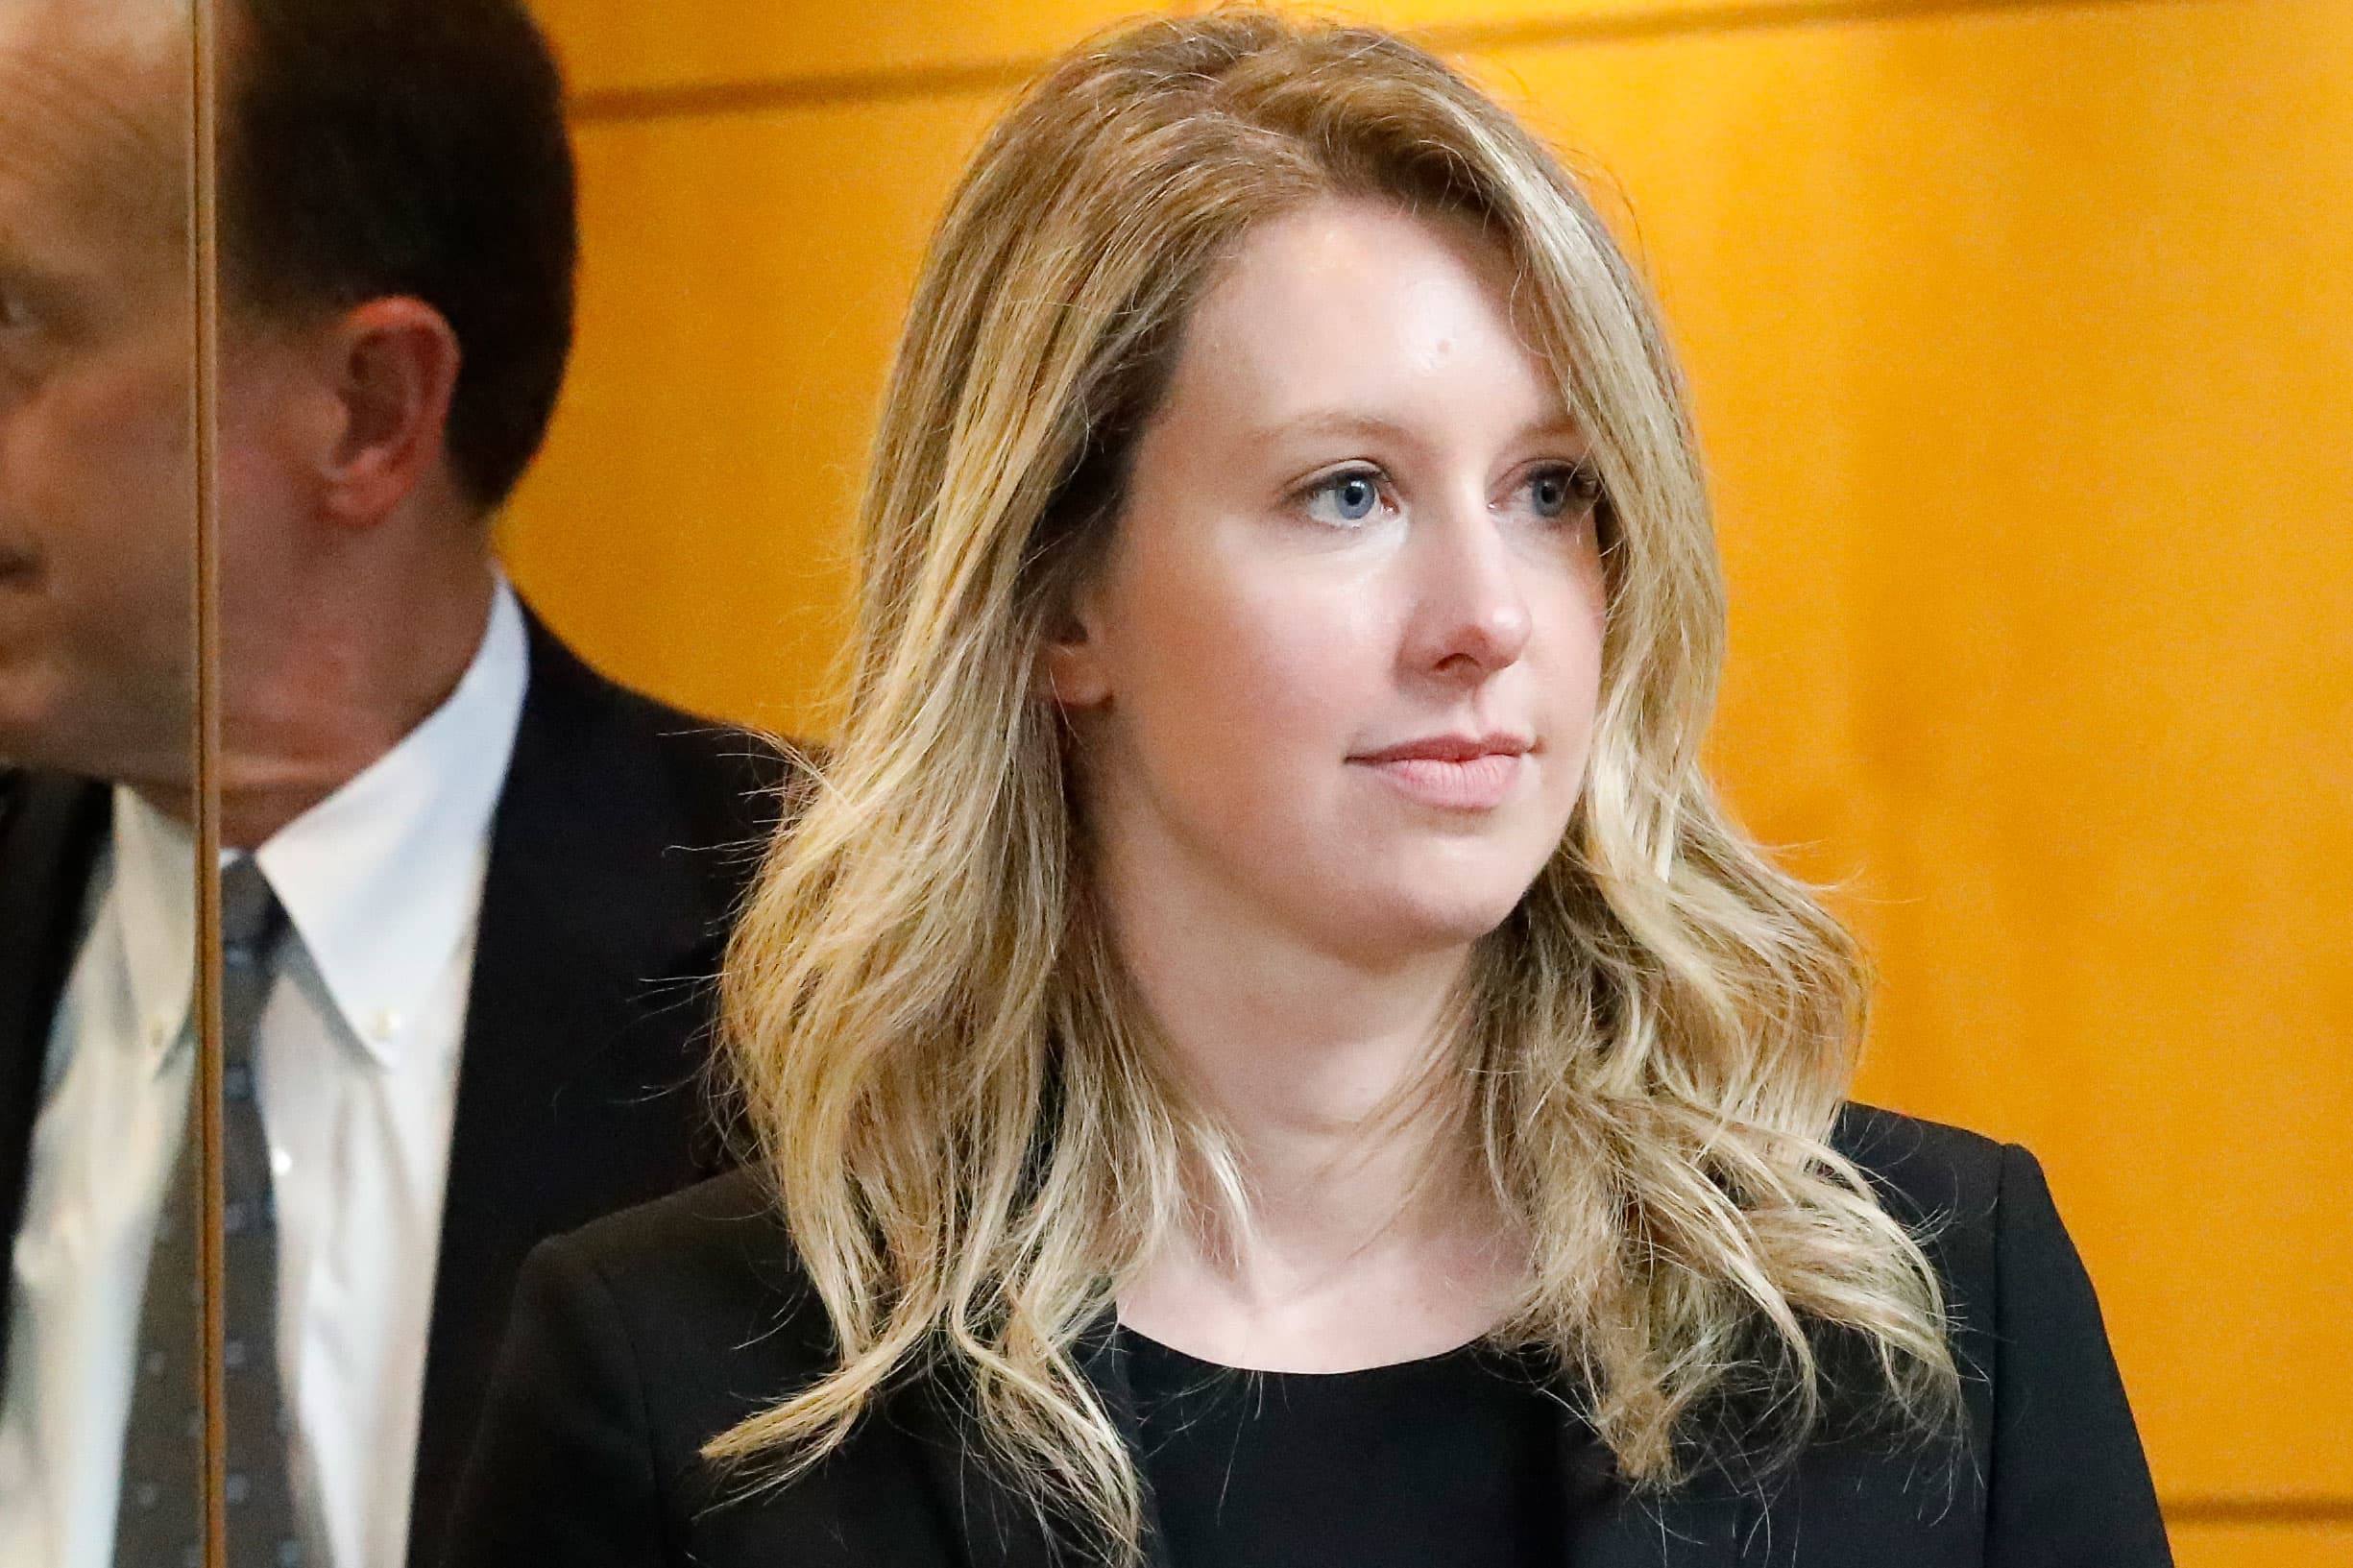 Ex-Theranos lab director testified that company cared more about 'fundraising than patient care'